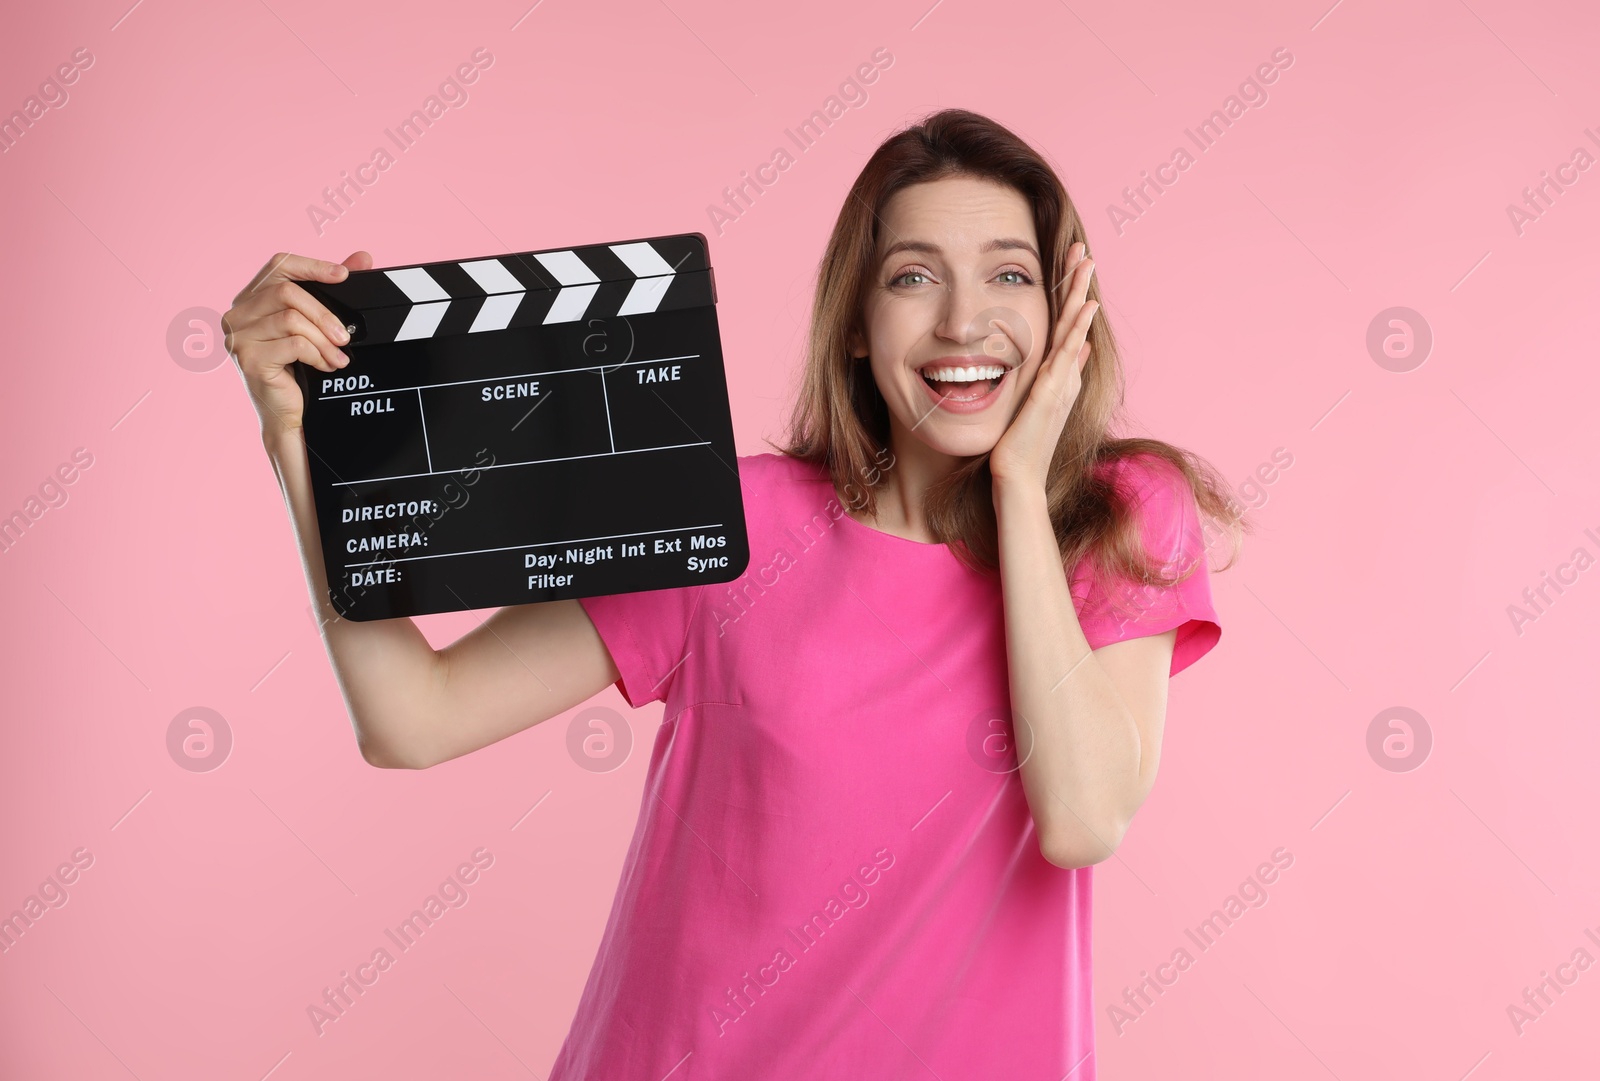 Photo of Making movie. Smiling excited woman with clapperboard on pink background